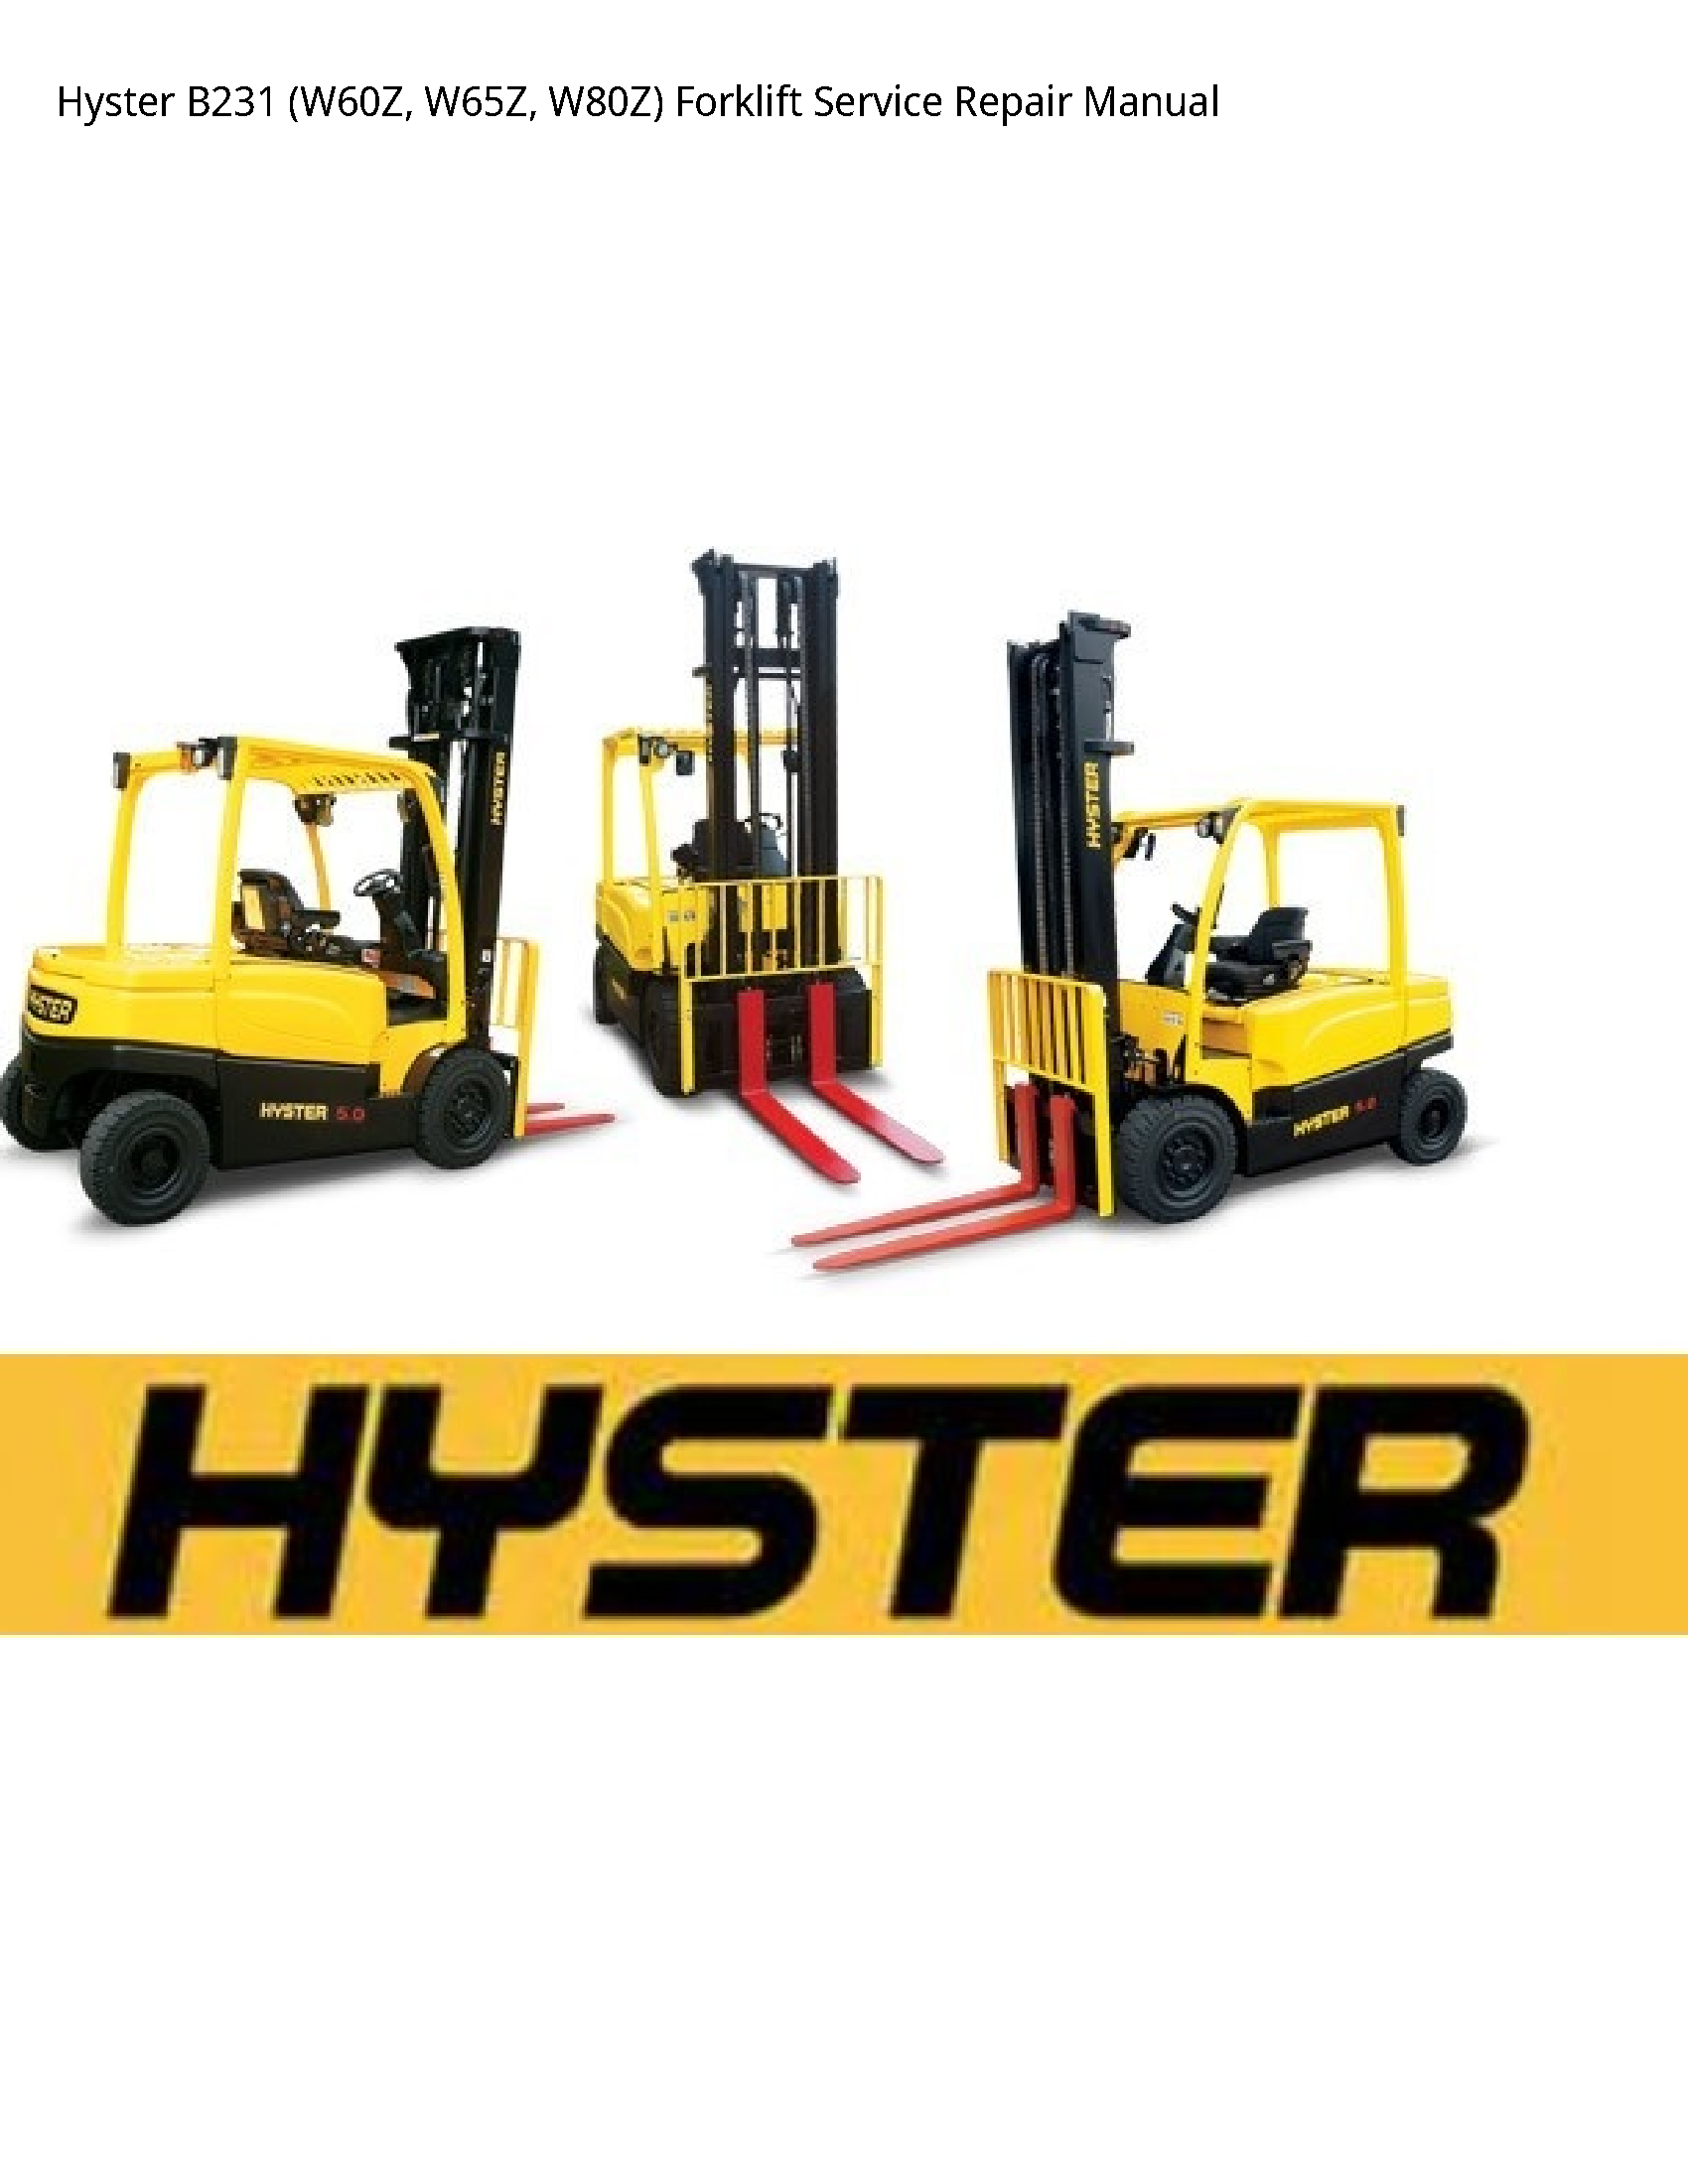 Hyster B231 Forklift manual